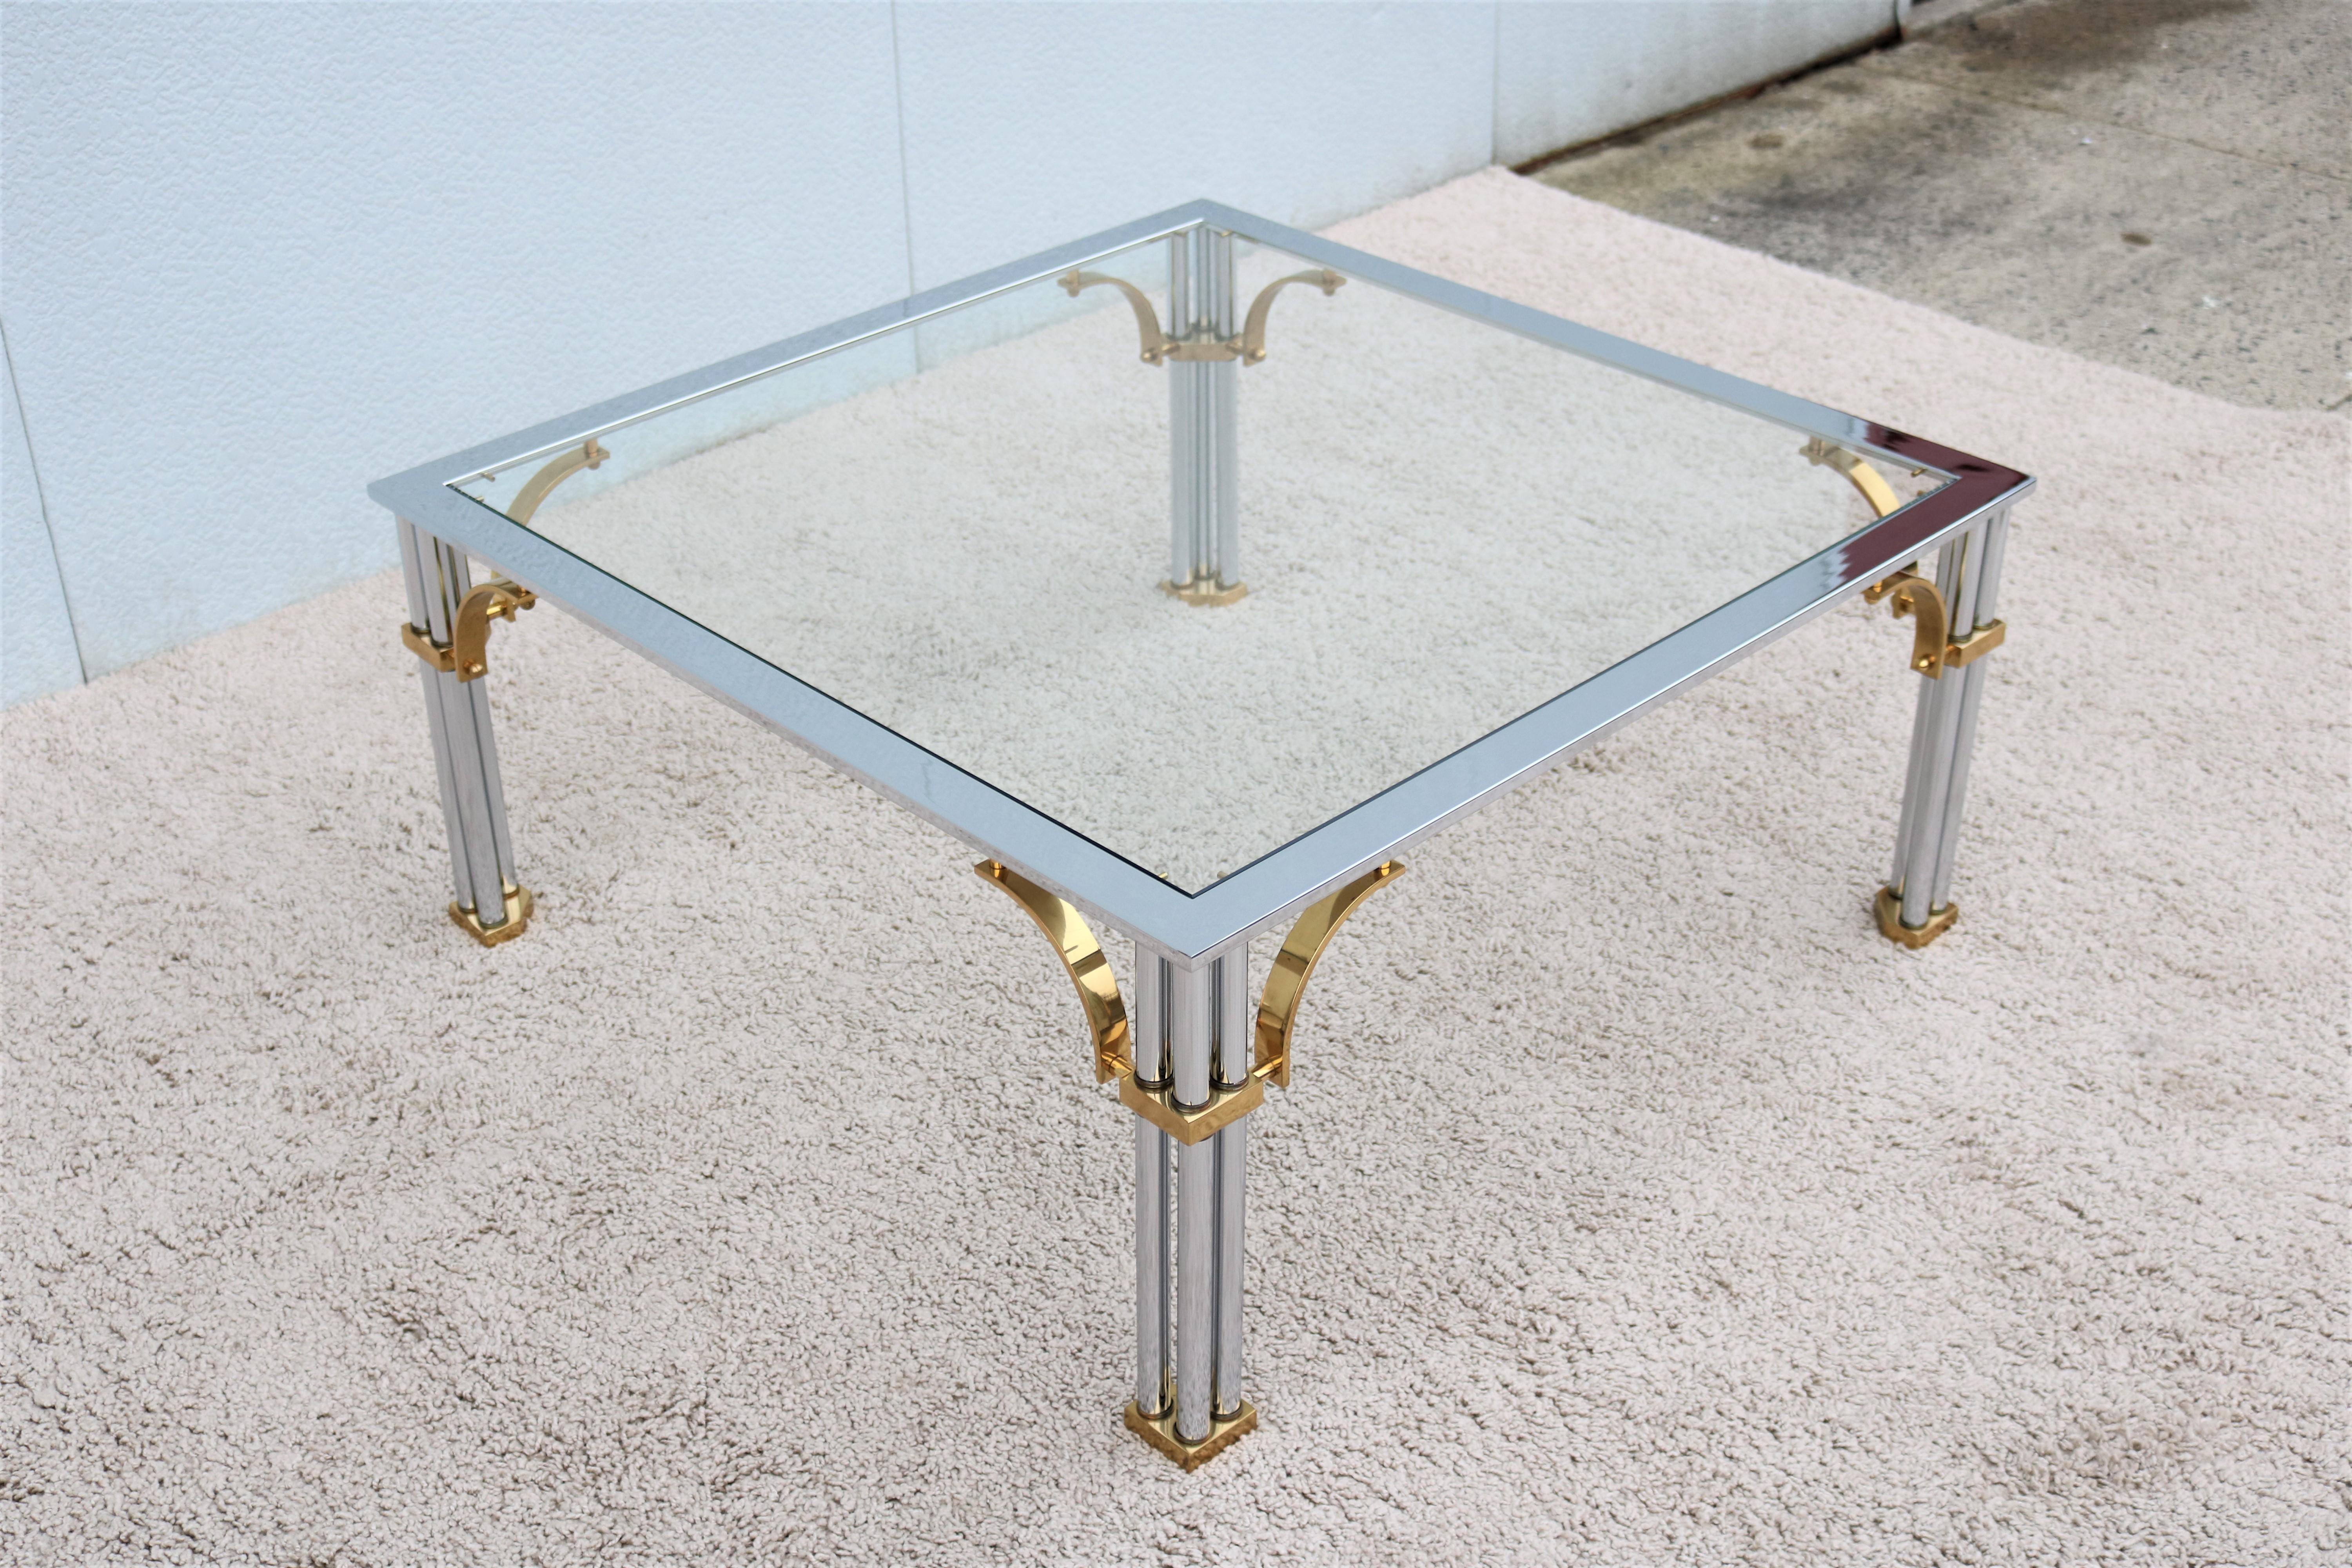 Polished Vintage Regency Maison Jansen Style Brass Chrome and Glass Square Coffee Table For Sale